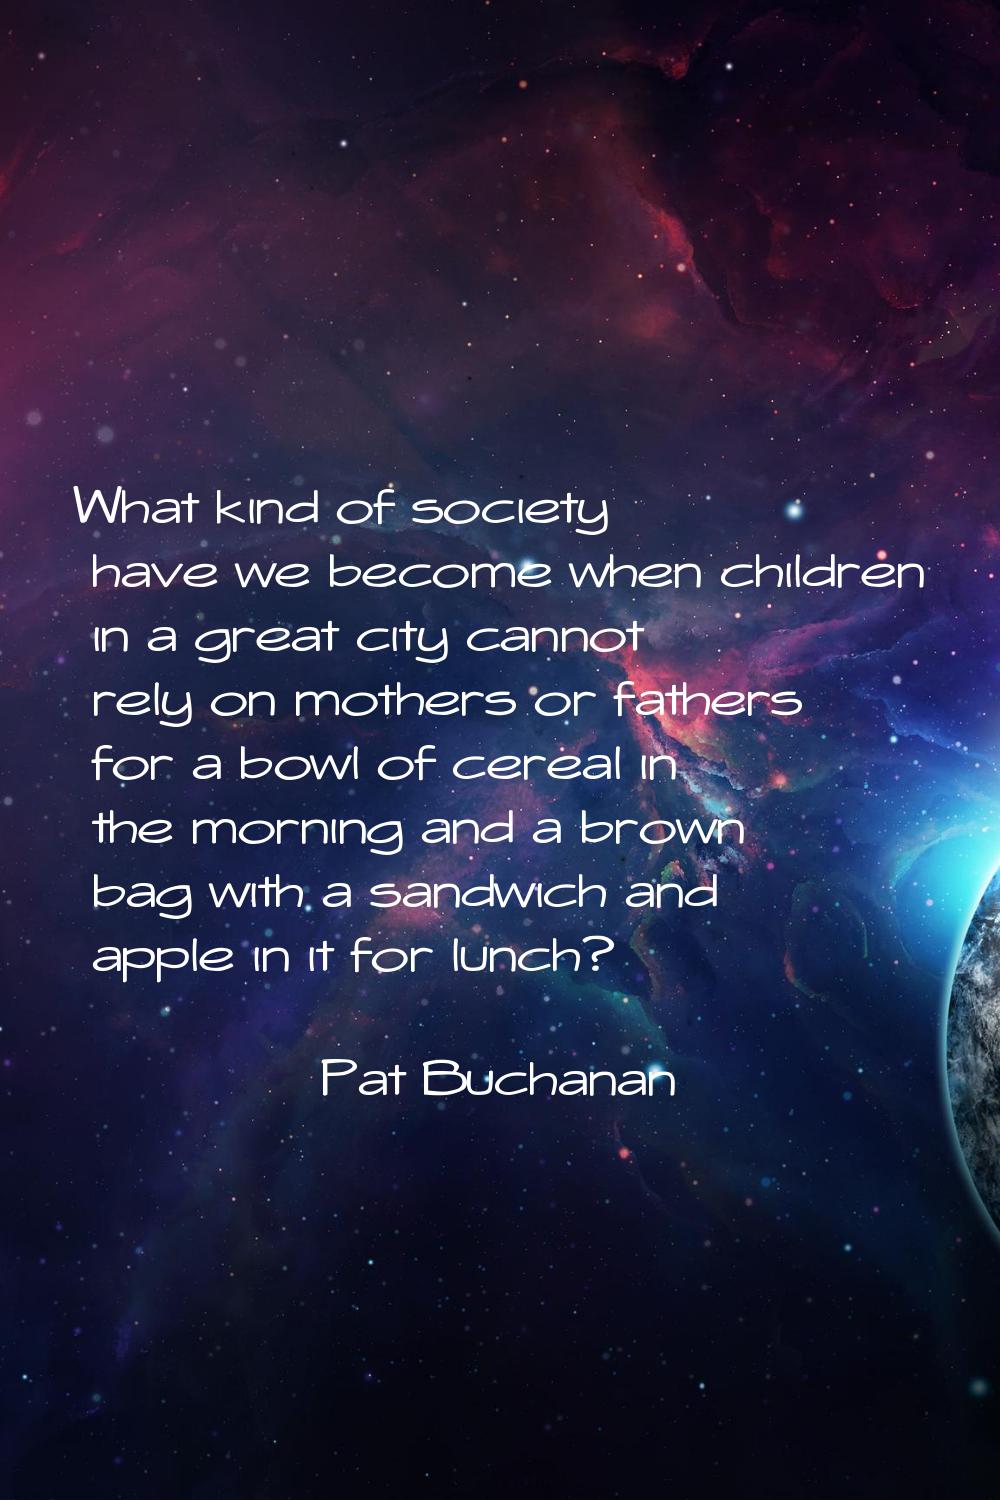 What kind of society have we become when children in a great city cannot rely on mothers or fathers